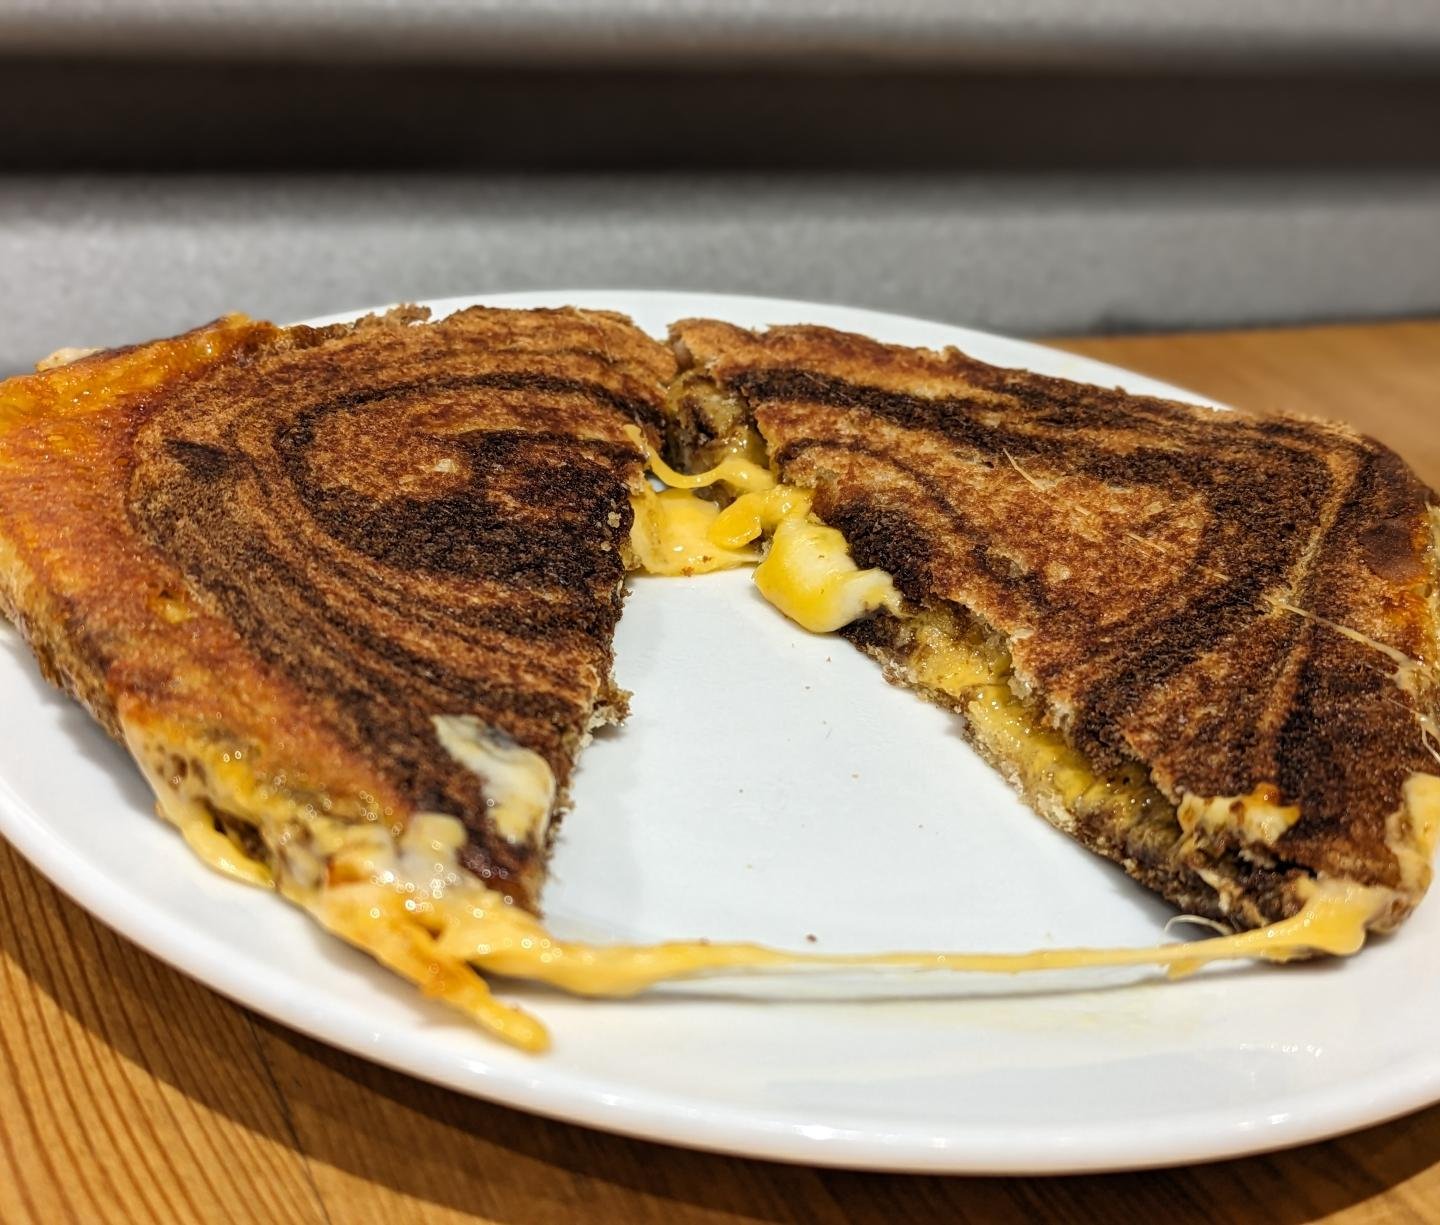 Today is the perfect day for comfort food. Come in for a cheesy grilled cheese sandwich on marble rye. ❤️ 

#wesupportcomfortfood #yeg #yegcafe #yegcoffee #supportsmallbusiness #supportmakers